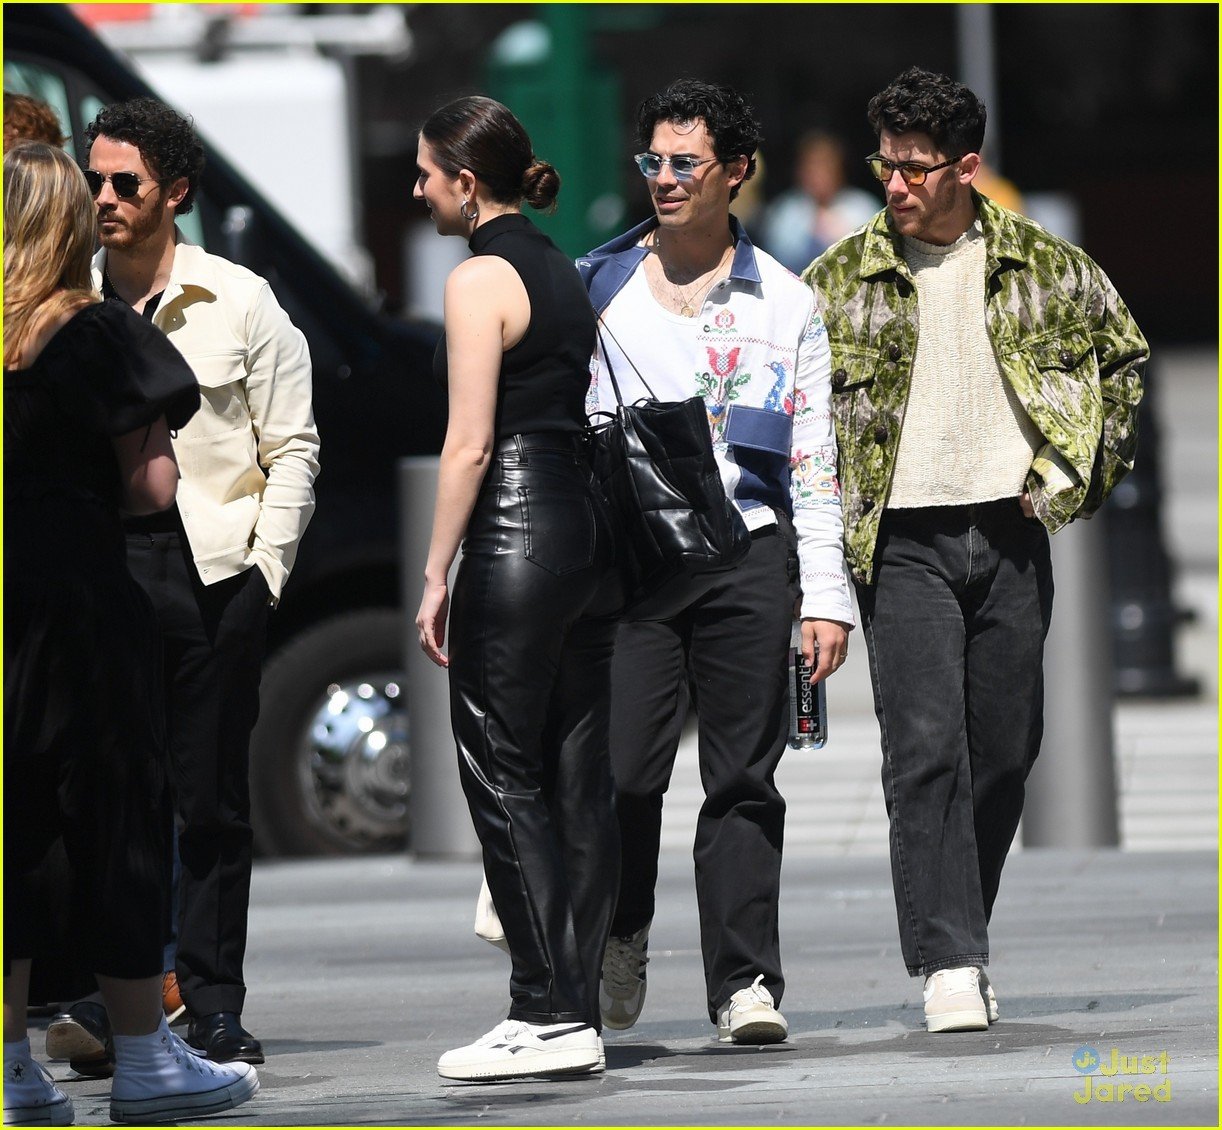 jonas brothers run into fan while out in nyc between meetings 01